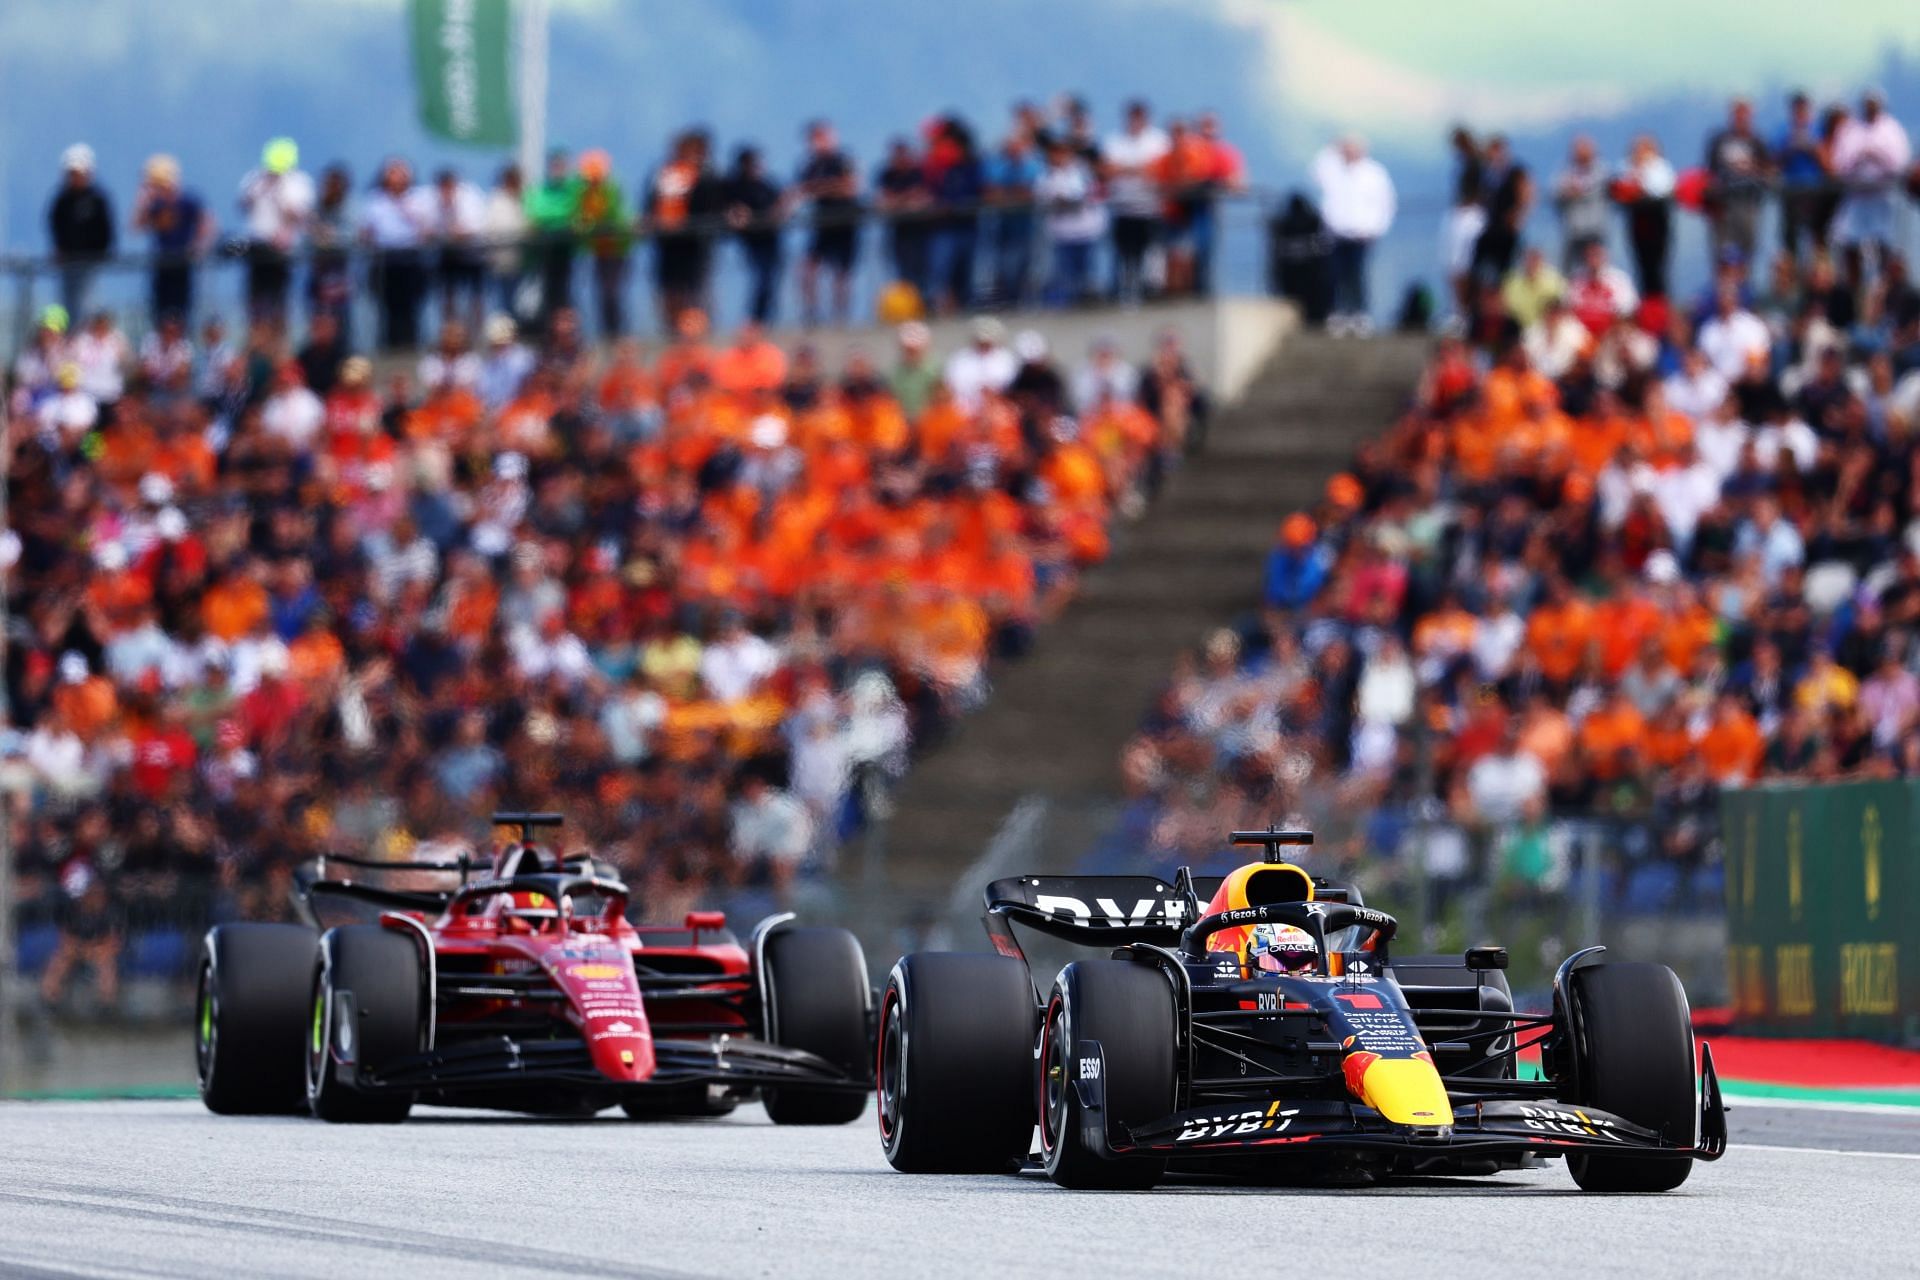 Charles Leclerc and Max Verstappen at the F1 Grand Prix of Austria